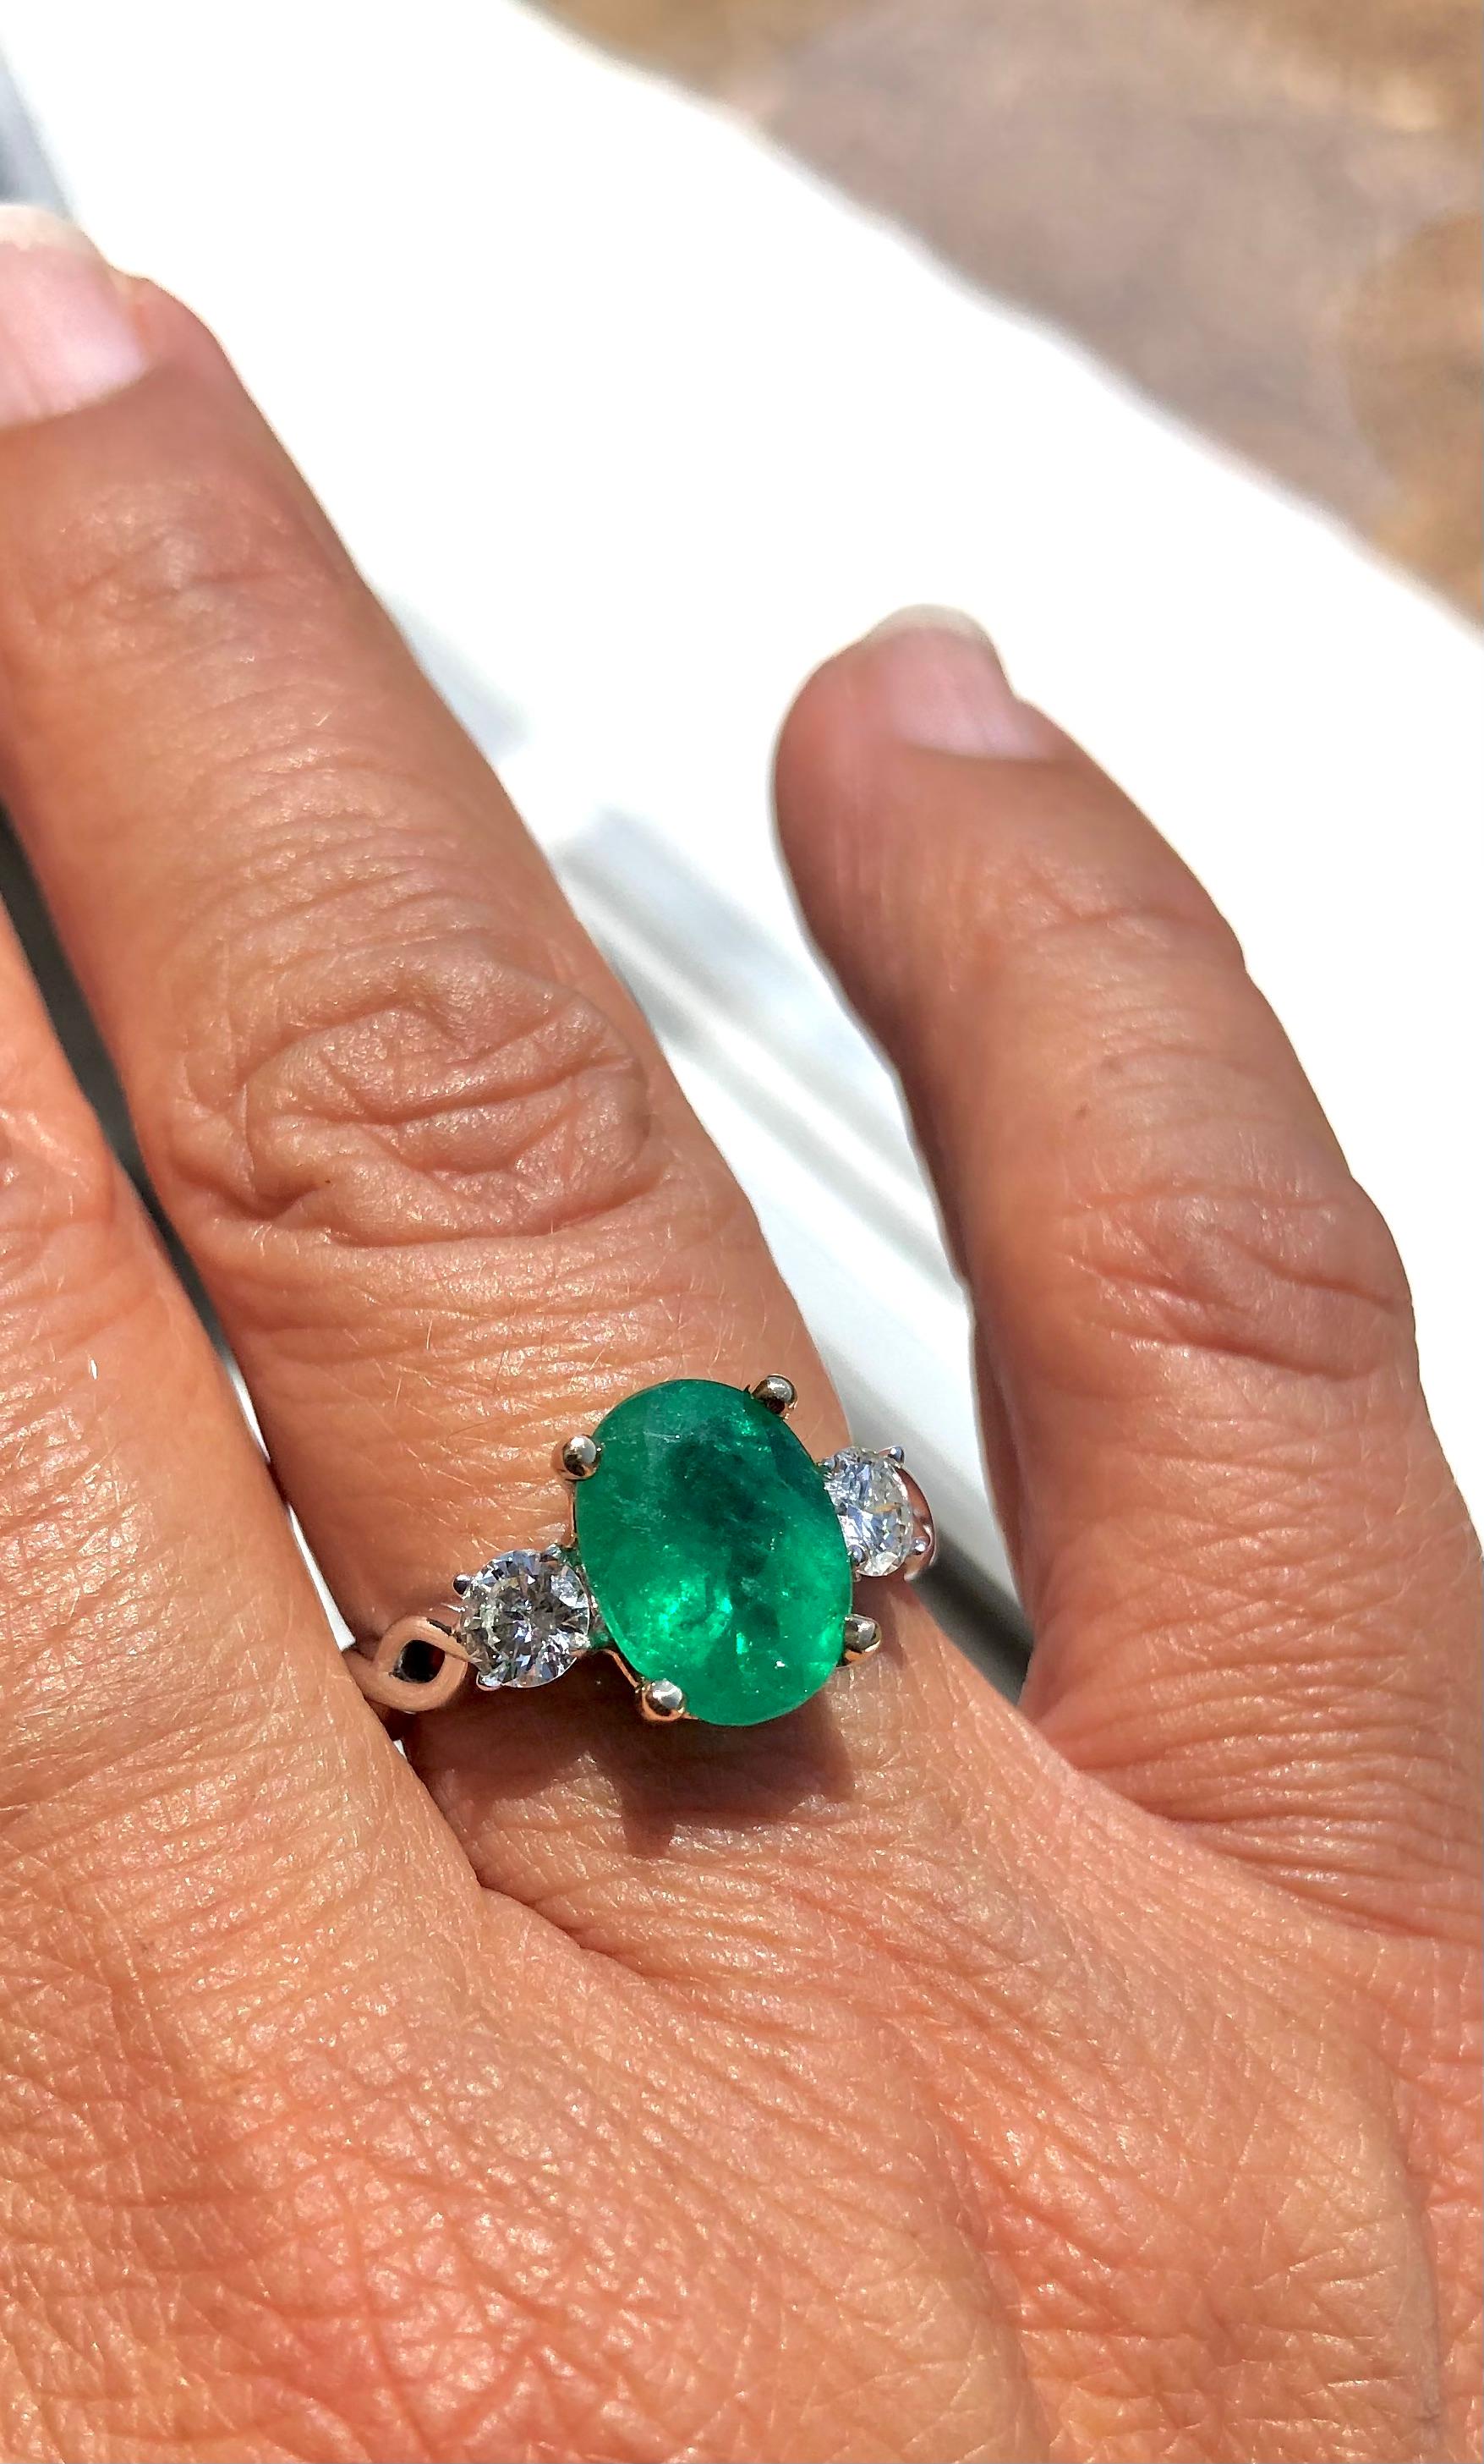 Estate a Classic 3.30 Carat Natural Emerald and Diamond Engagement Ring Three-Stone  14K
Primary Stones: Natural Colombian Emerald
Shape or Cut: Oval Cut
Color/Clarity: Medium Green/ Clarity VS
Emerald Weight: Approx. 2.84 carats
Second Stone: